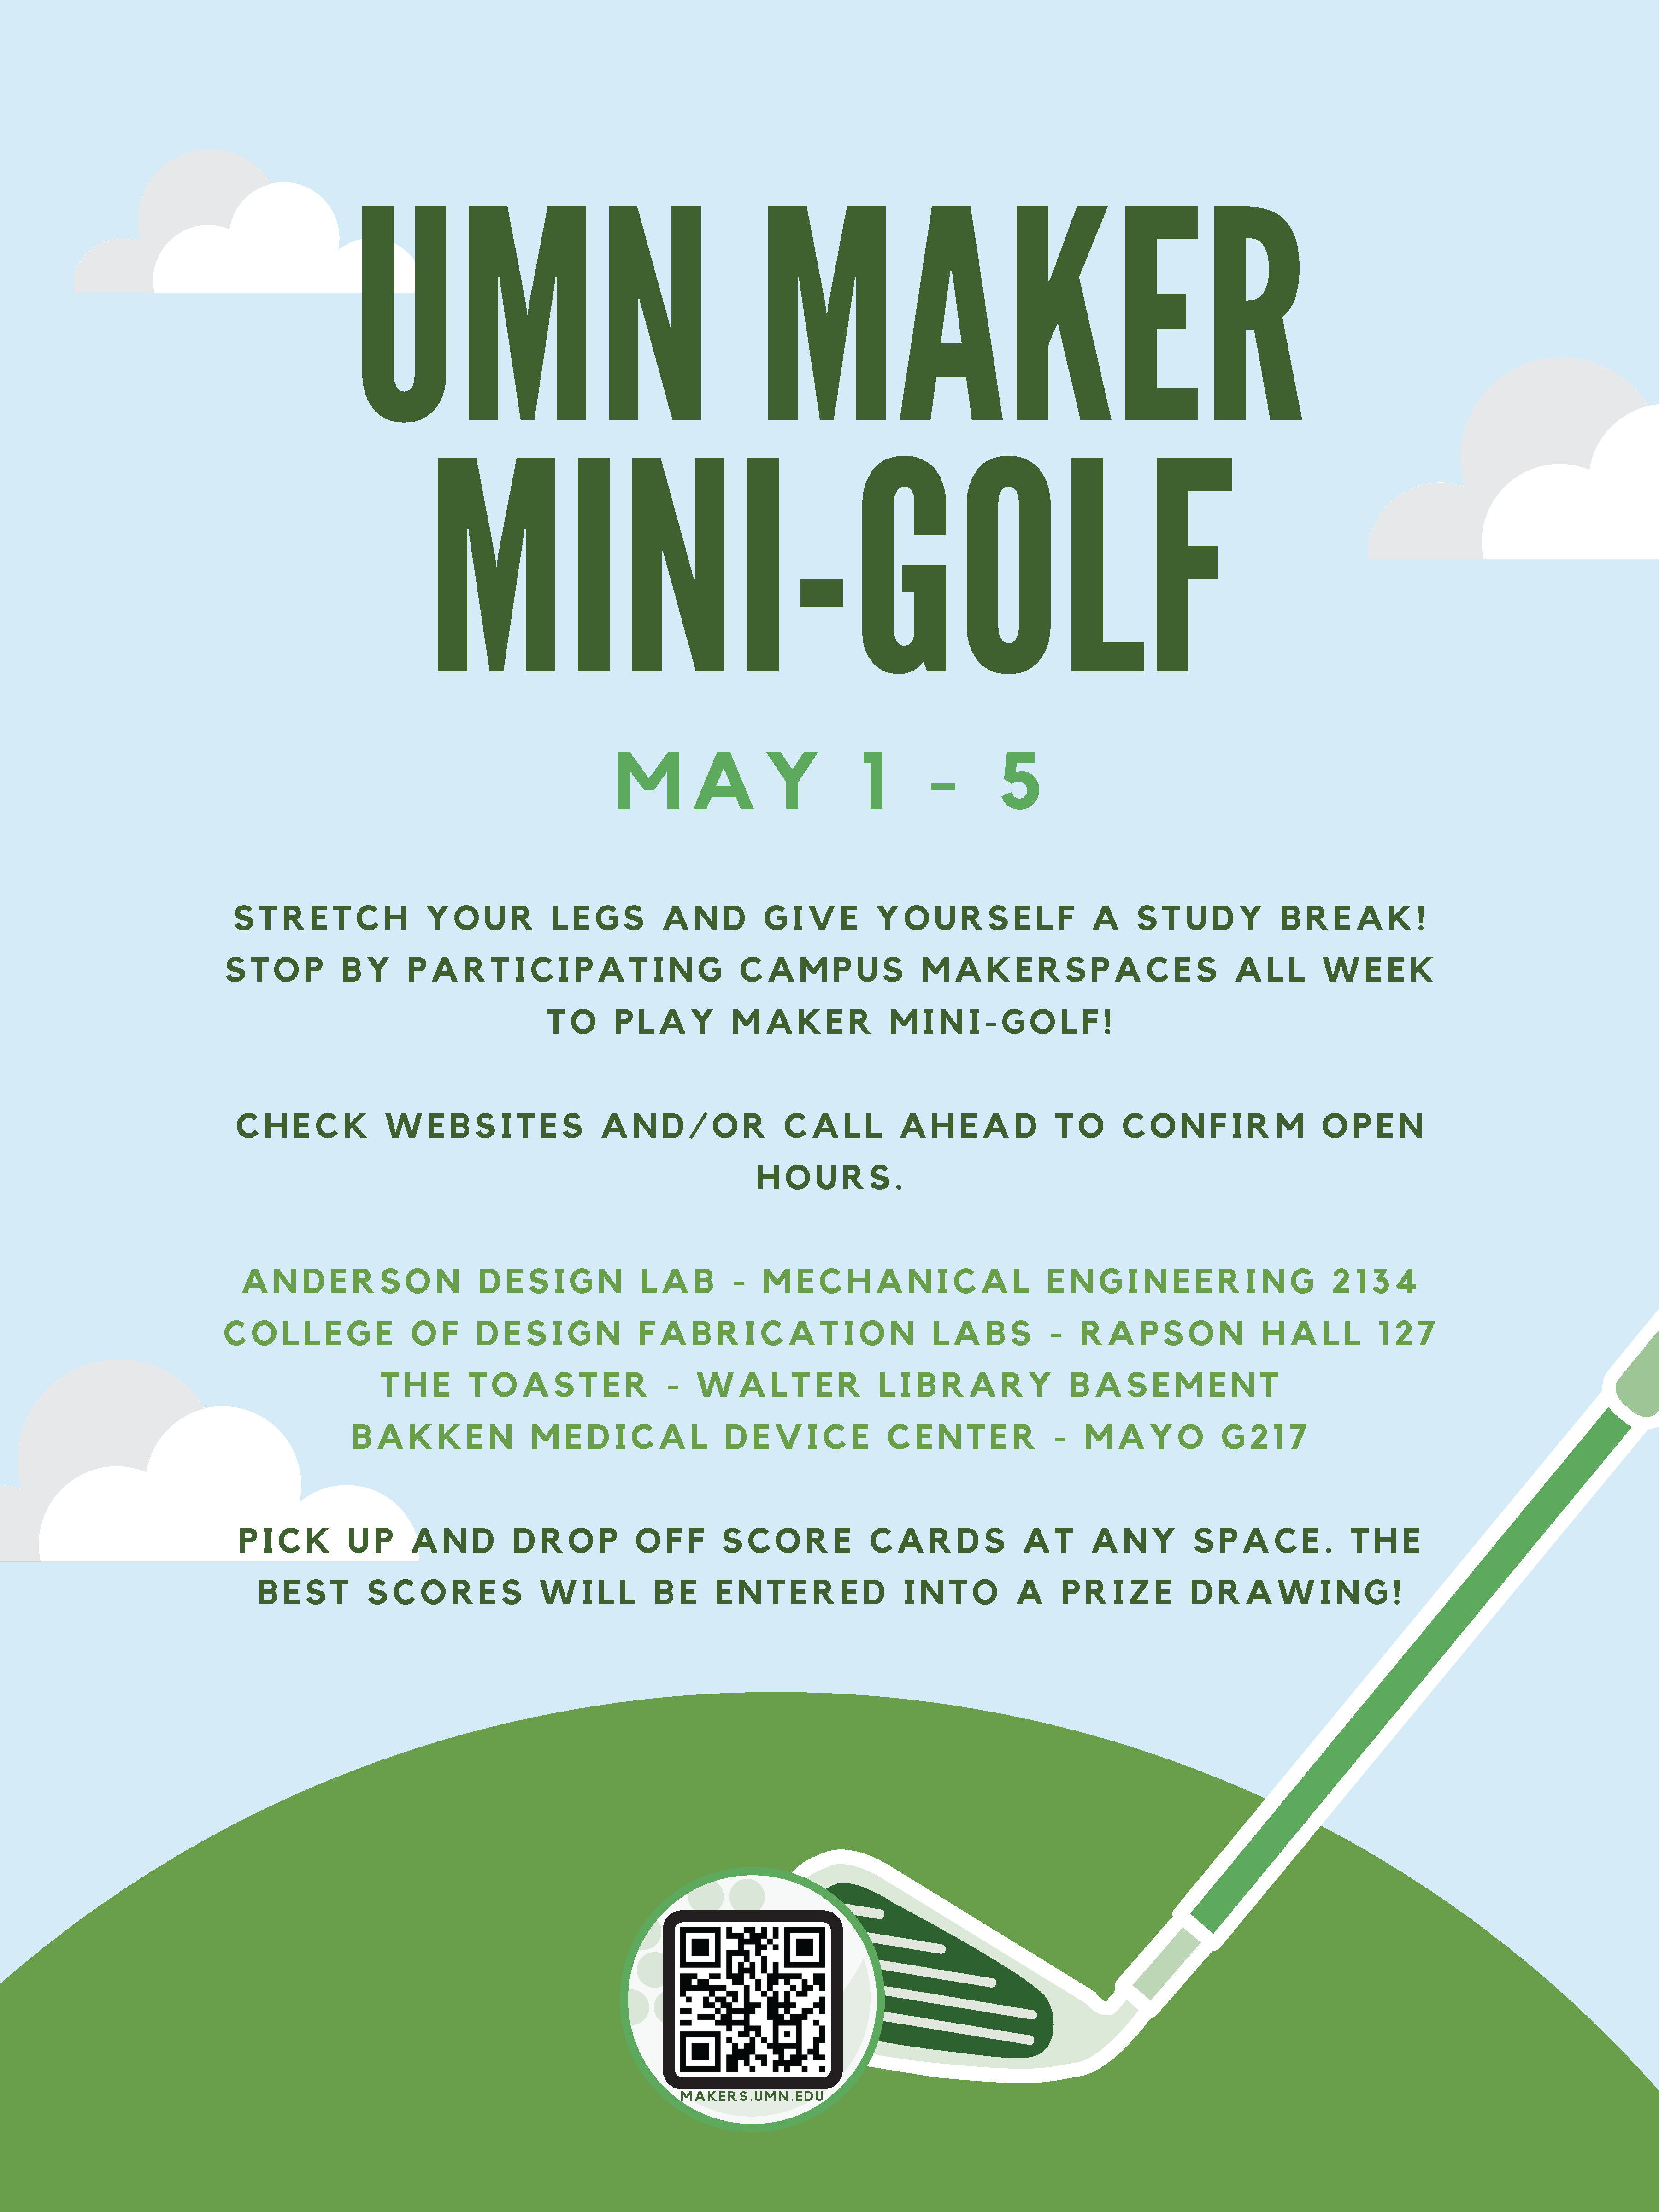 Stop by participating campus makerspaces all week May 1-5 to play mini golf!